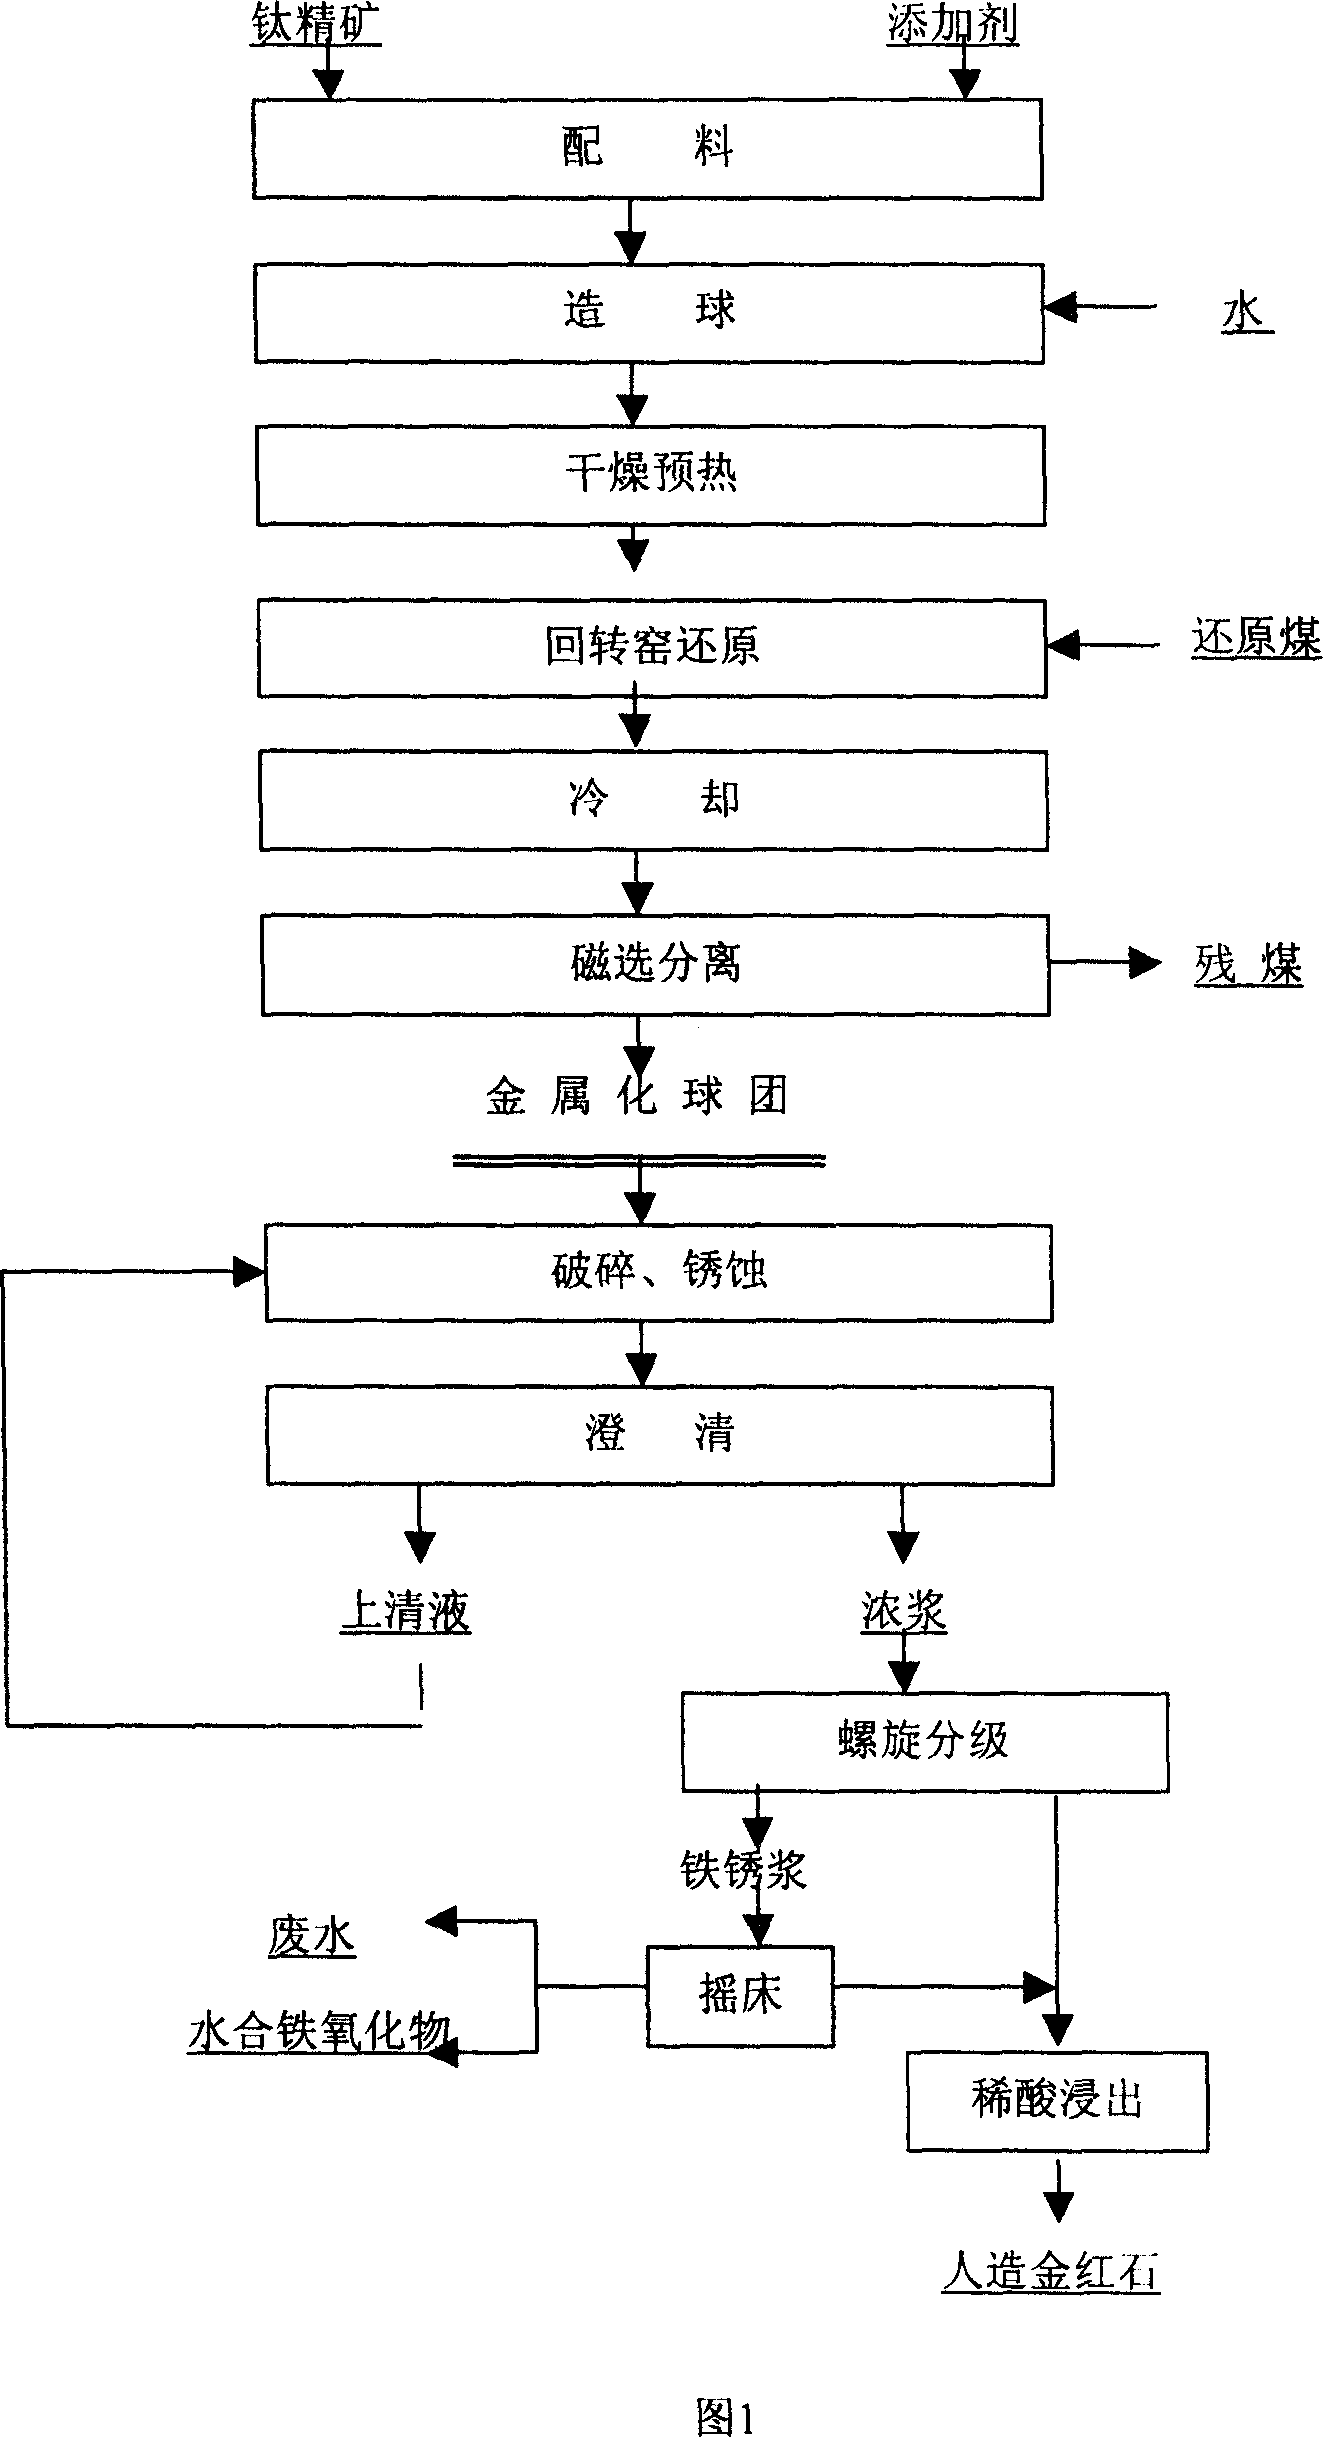 Method of preparing synthetic rutile from ore type ilmenite concentrate